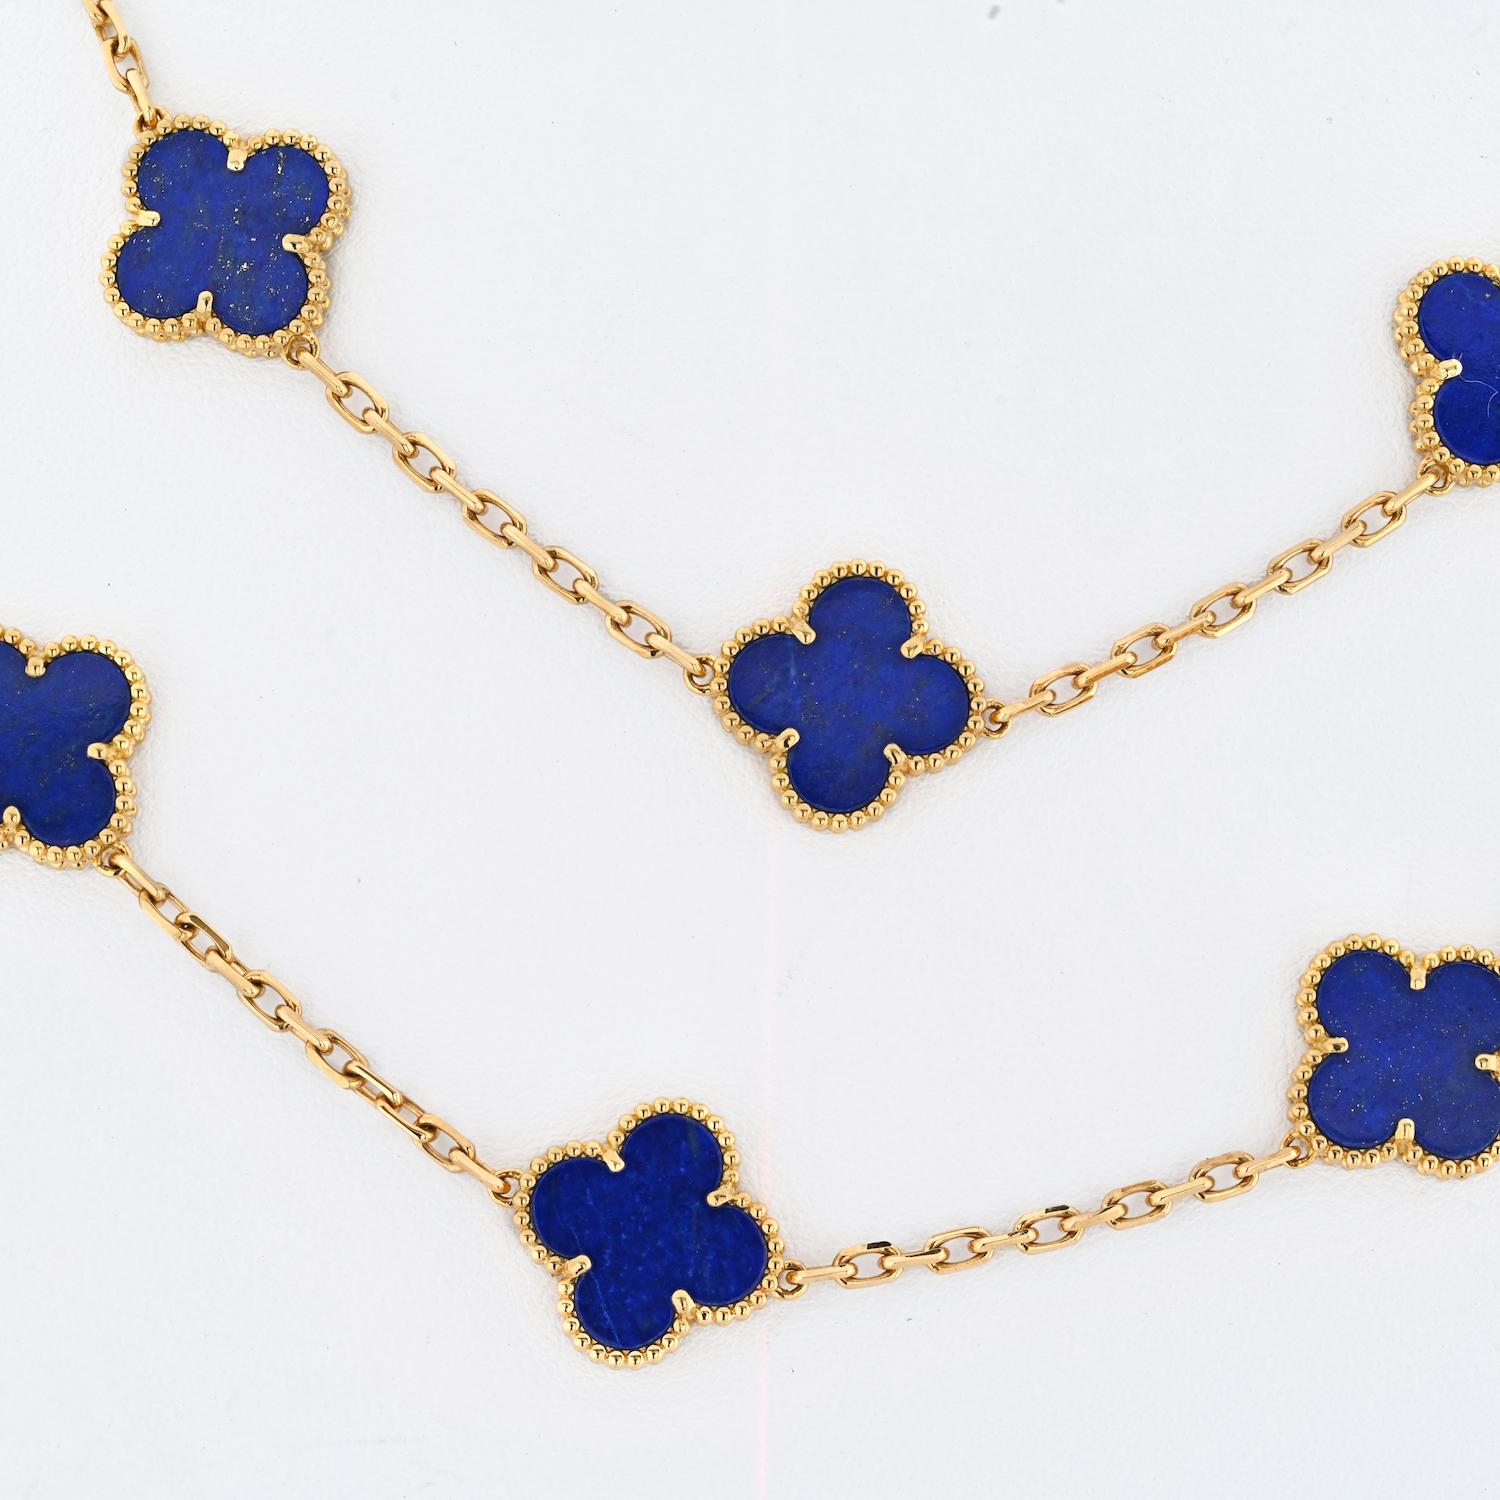 Van Cleef & Arpels 18K Yellow Gold 20 Motif Lapis Alhambra Chain Necklace.

Very rare and highly desirable Van Cleef & Arpels 18k yellow gold vintage Alhambra 20 motif lapis lazuli necklace. It is in perfect condition in VCA box. 

The necklace is